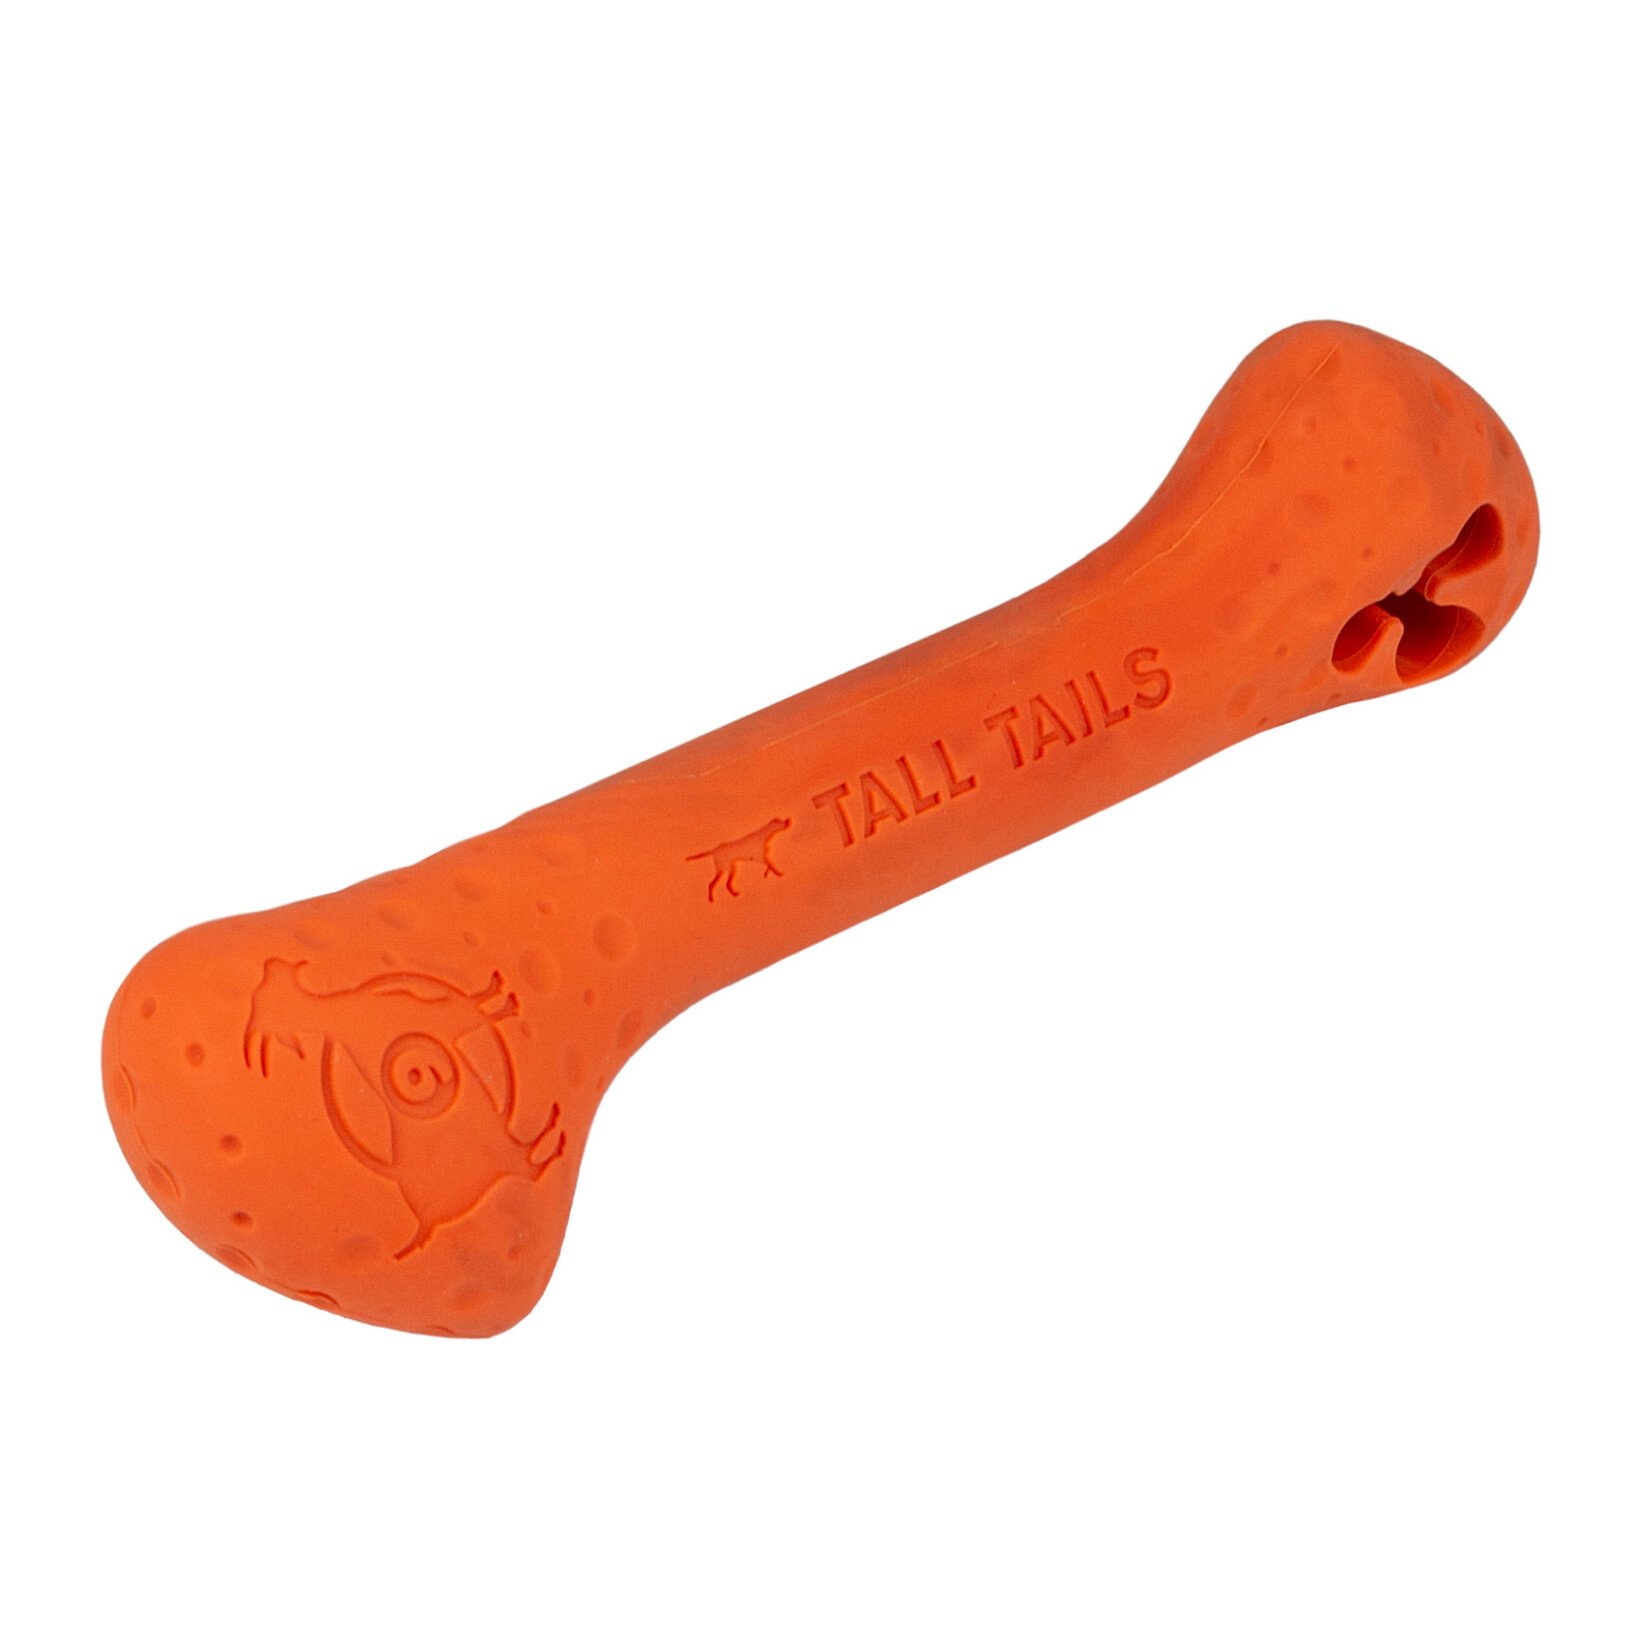 Tall Tails Tall Tails Natural Rubber GOAT Sport Bone